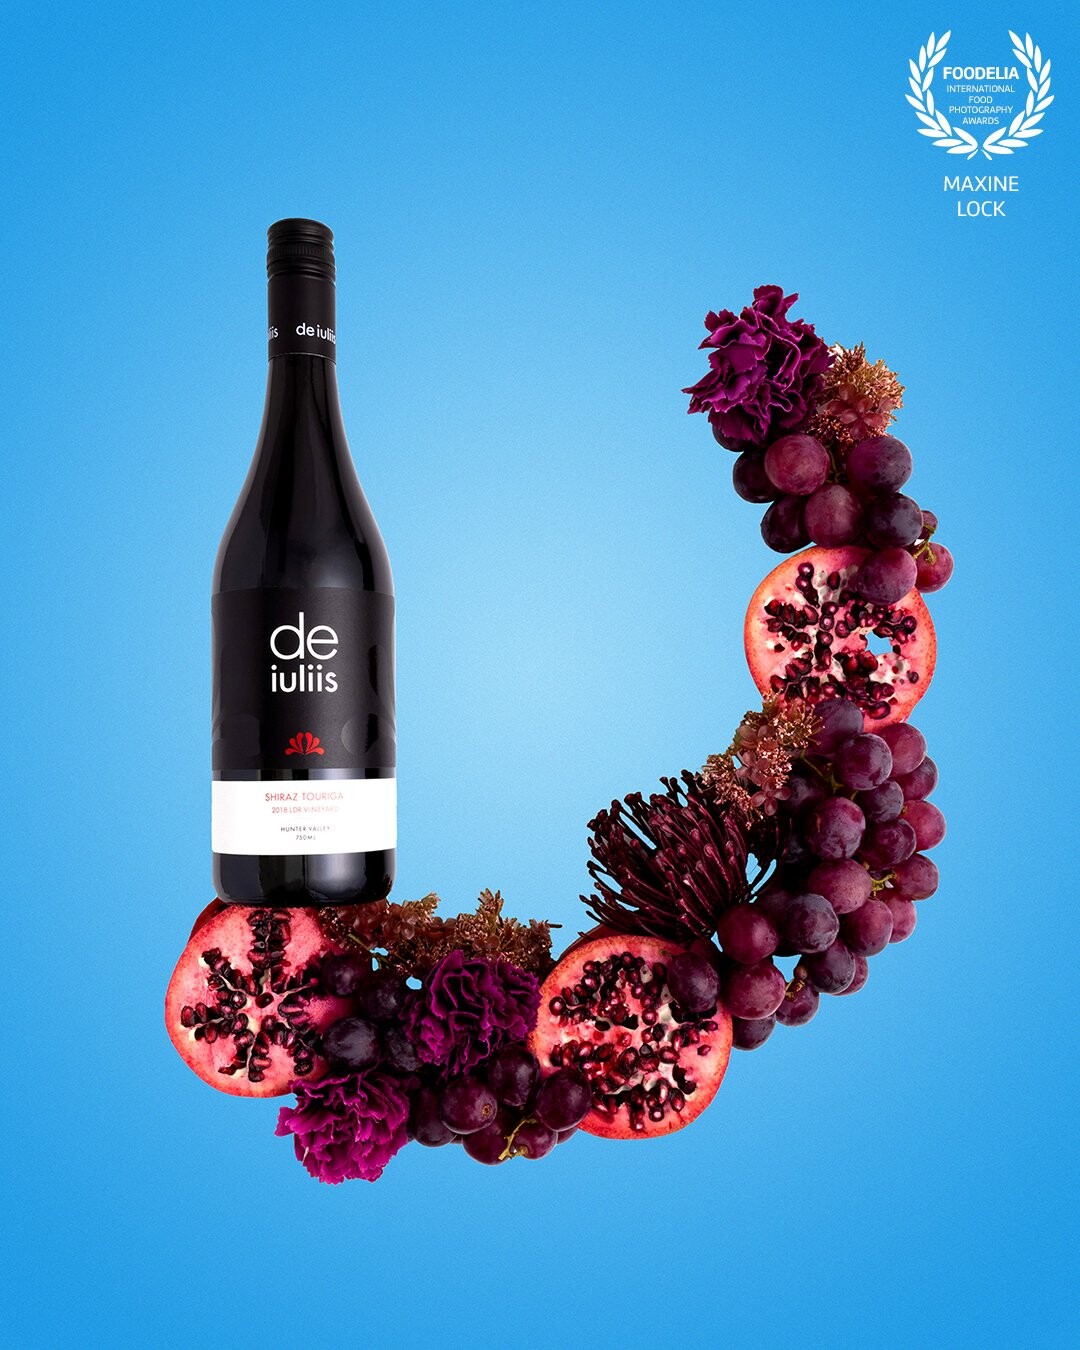 Using red grapes, along with red flowers and other red-coloured fruits, to symbolise the rich redness of the bottle of red wine.